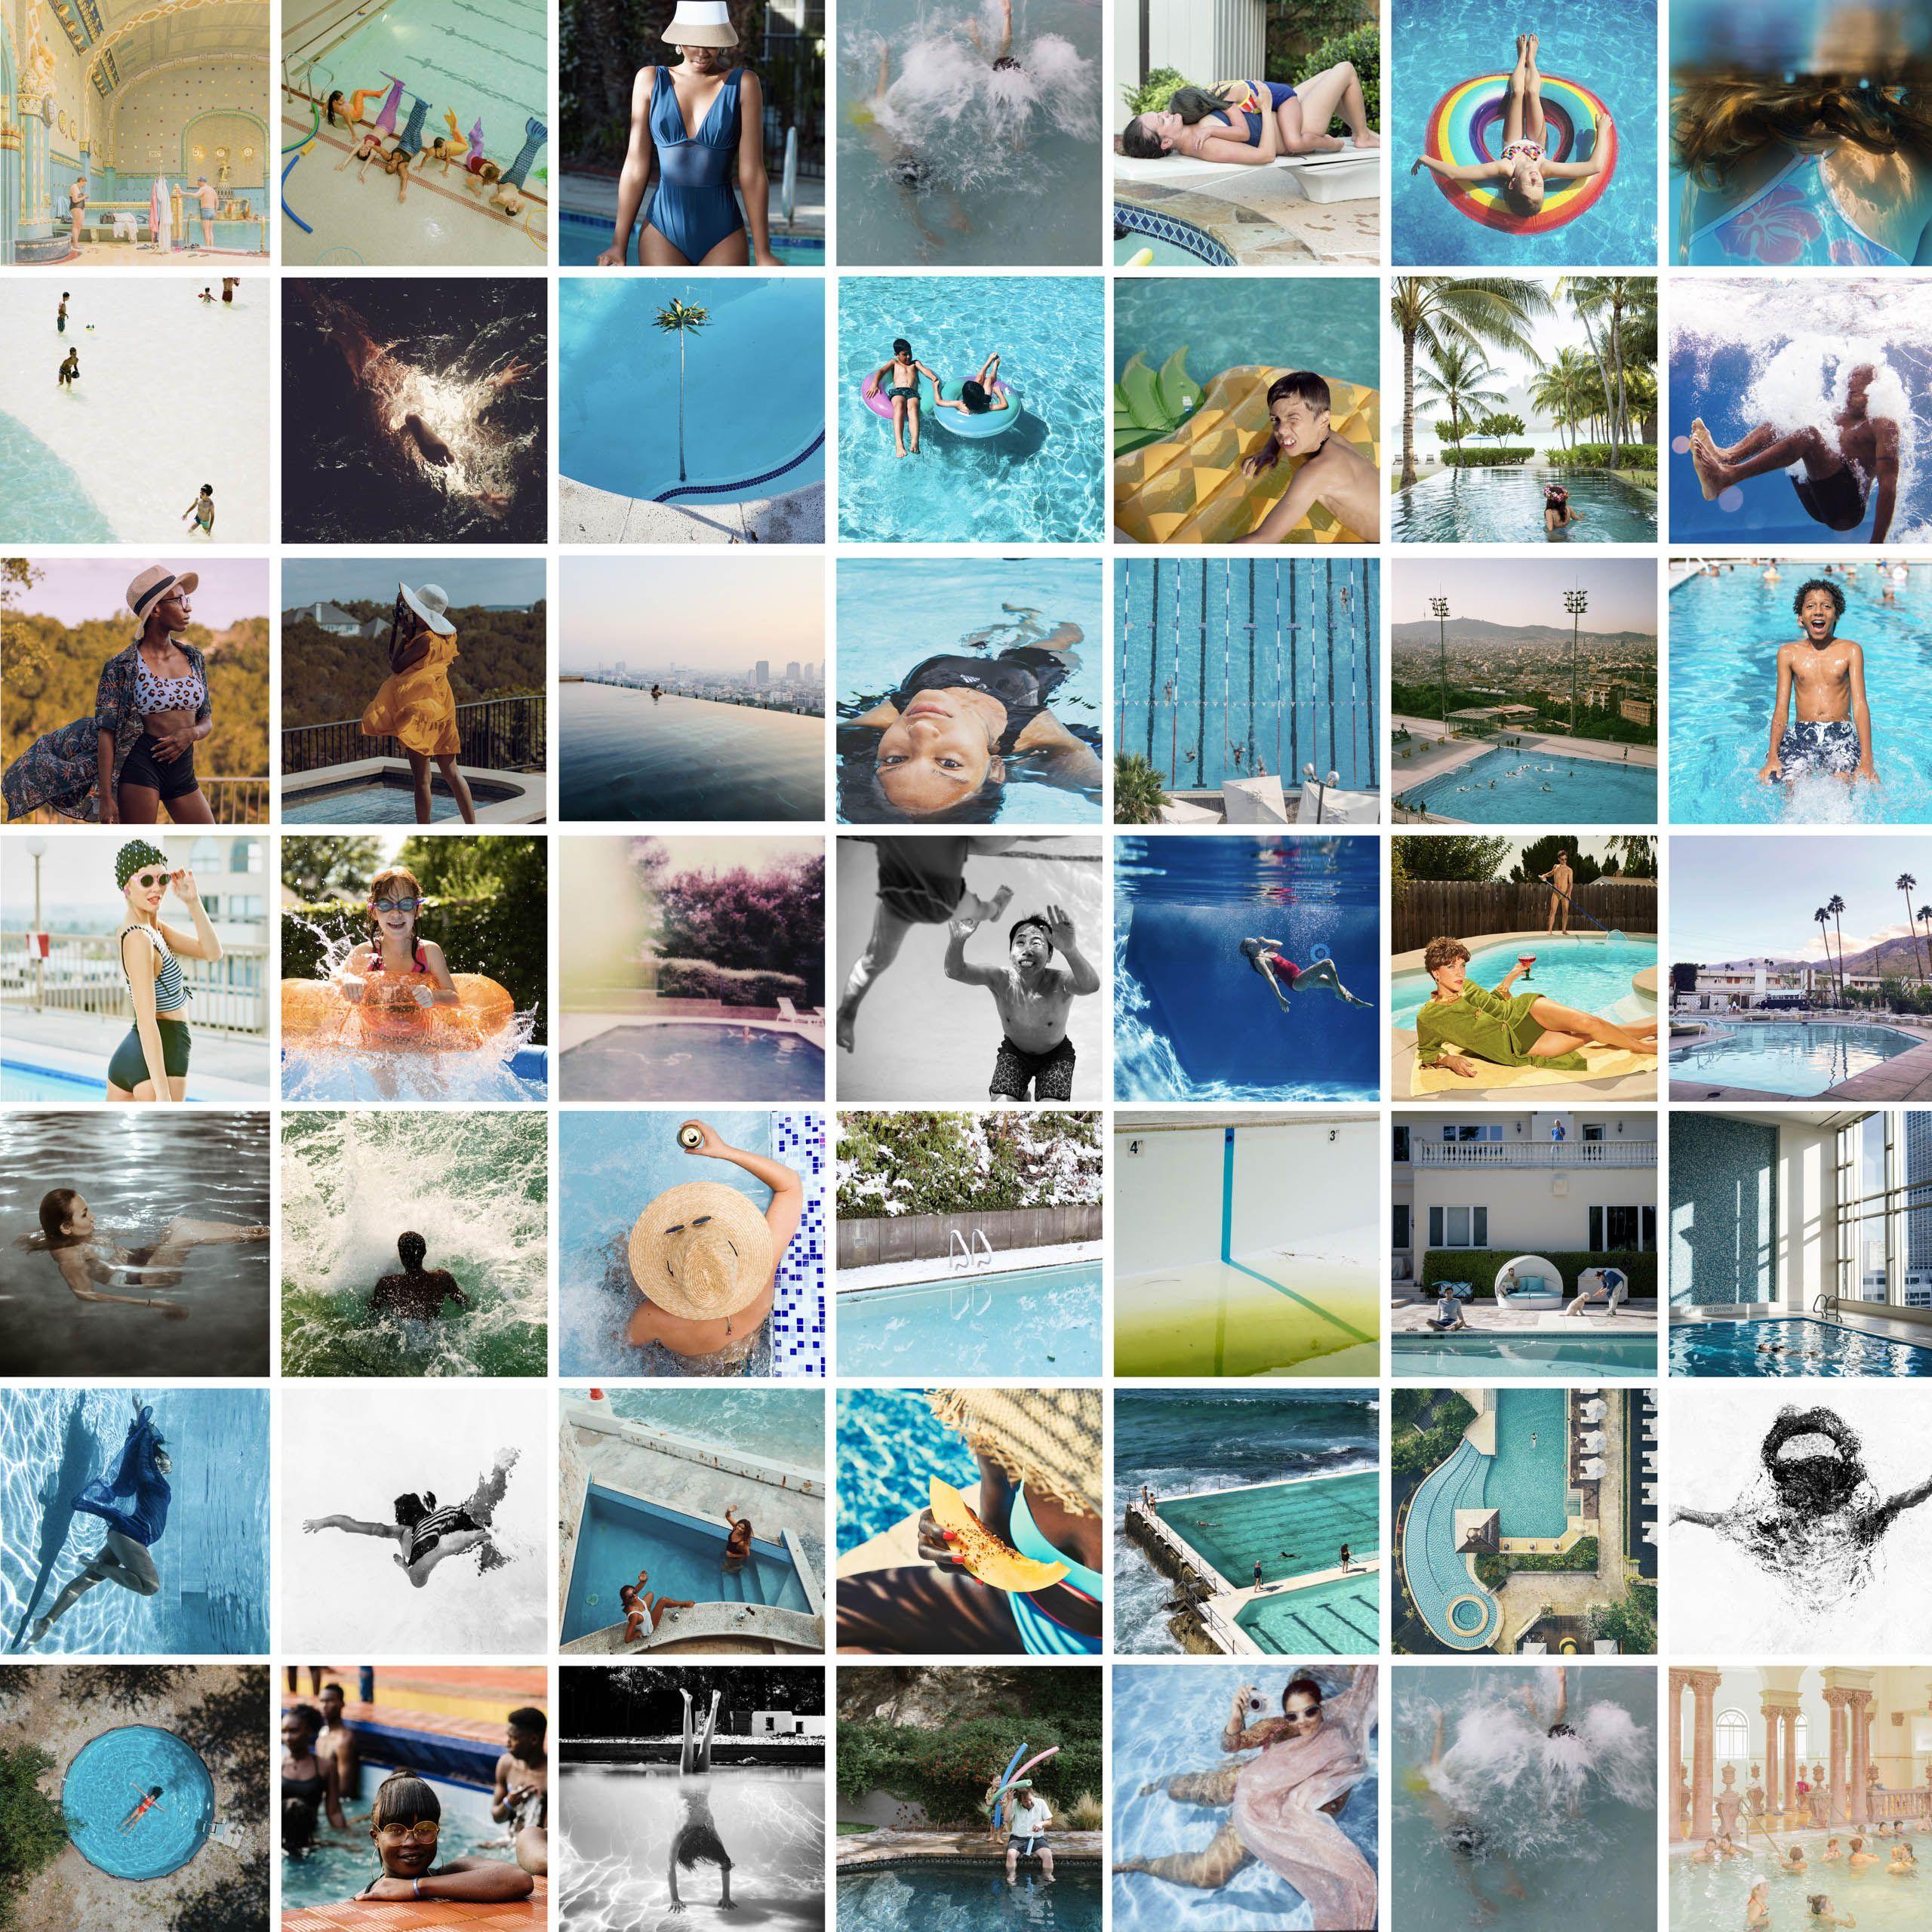 Cool Down With This Refreshing Collection of Swimming Pool Photos